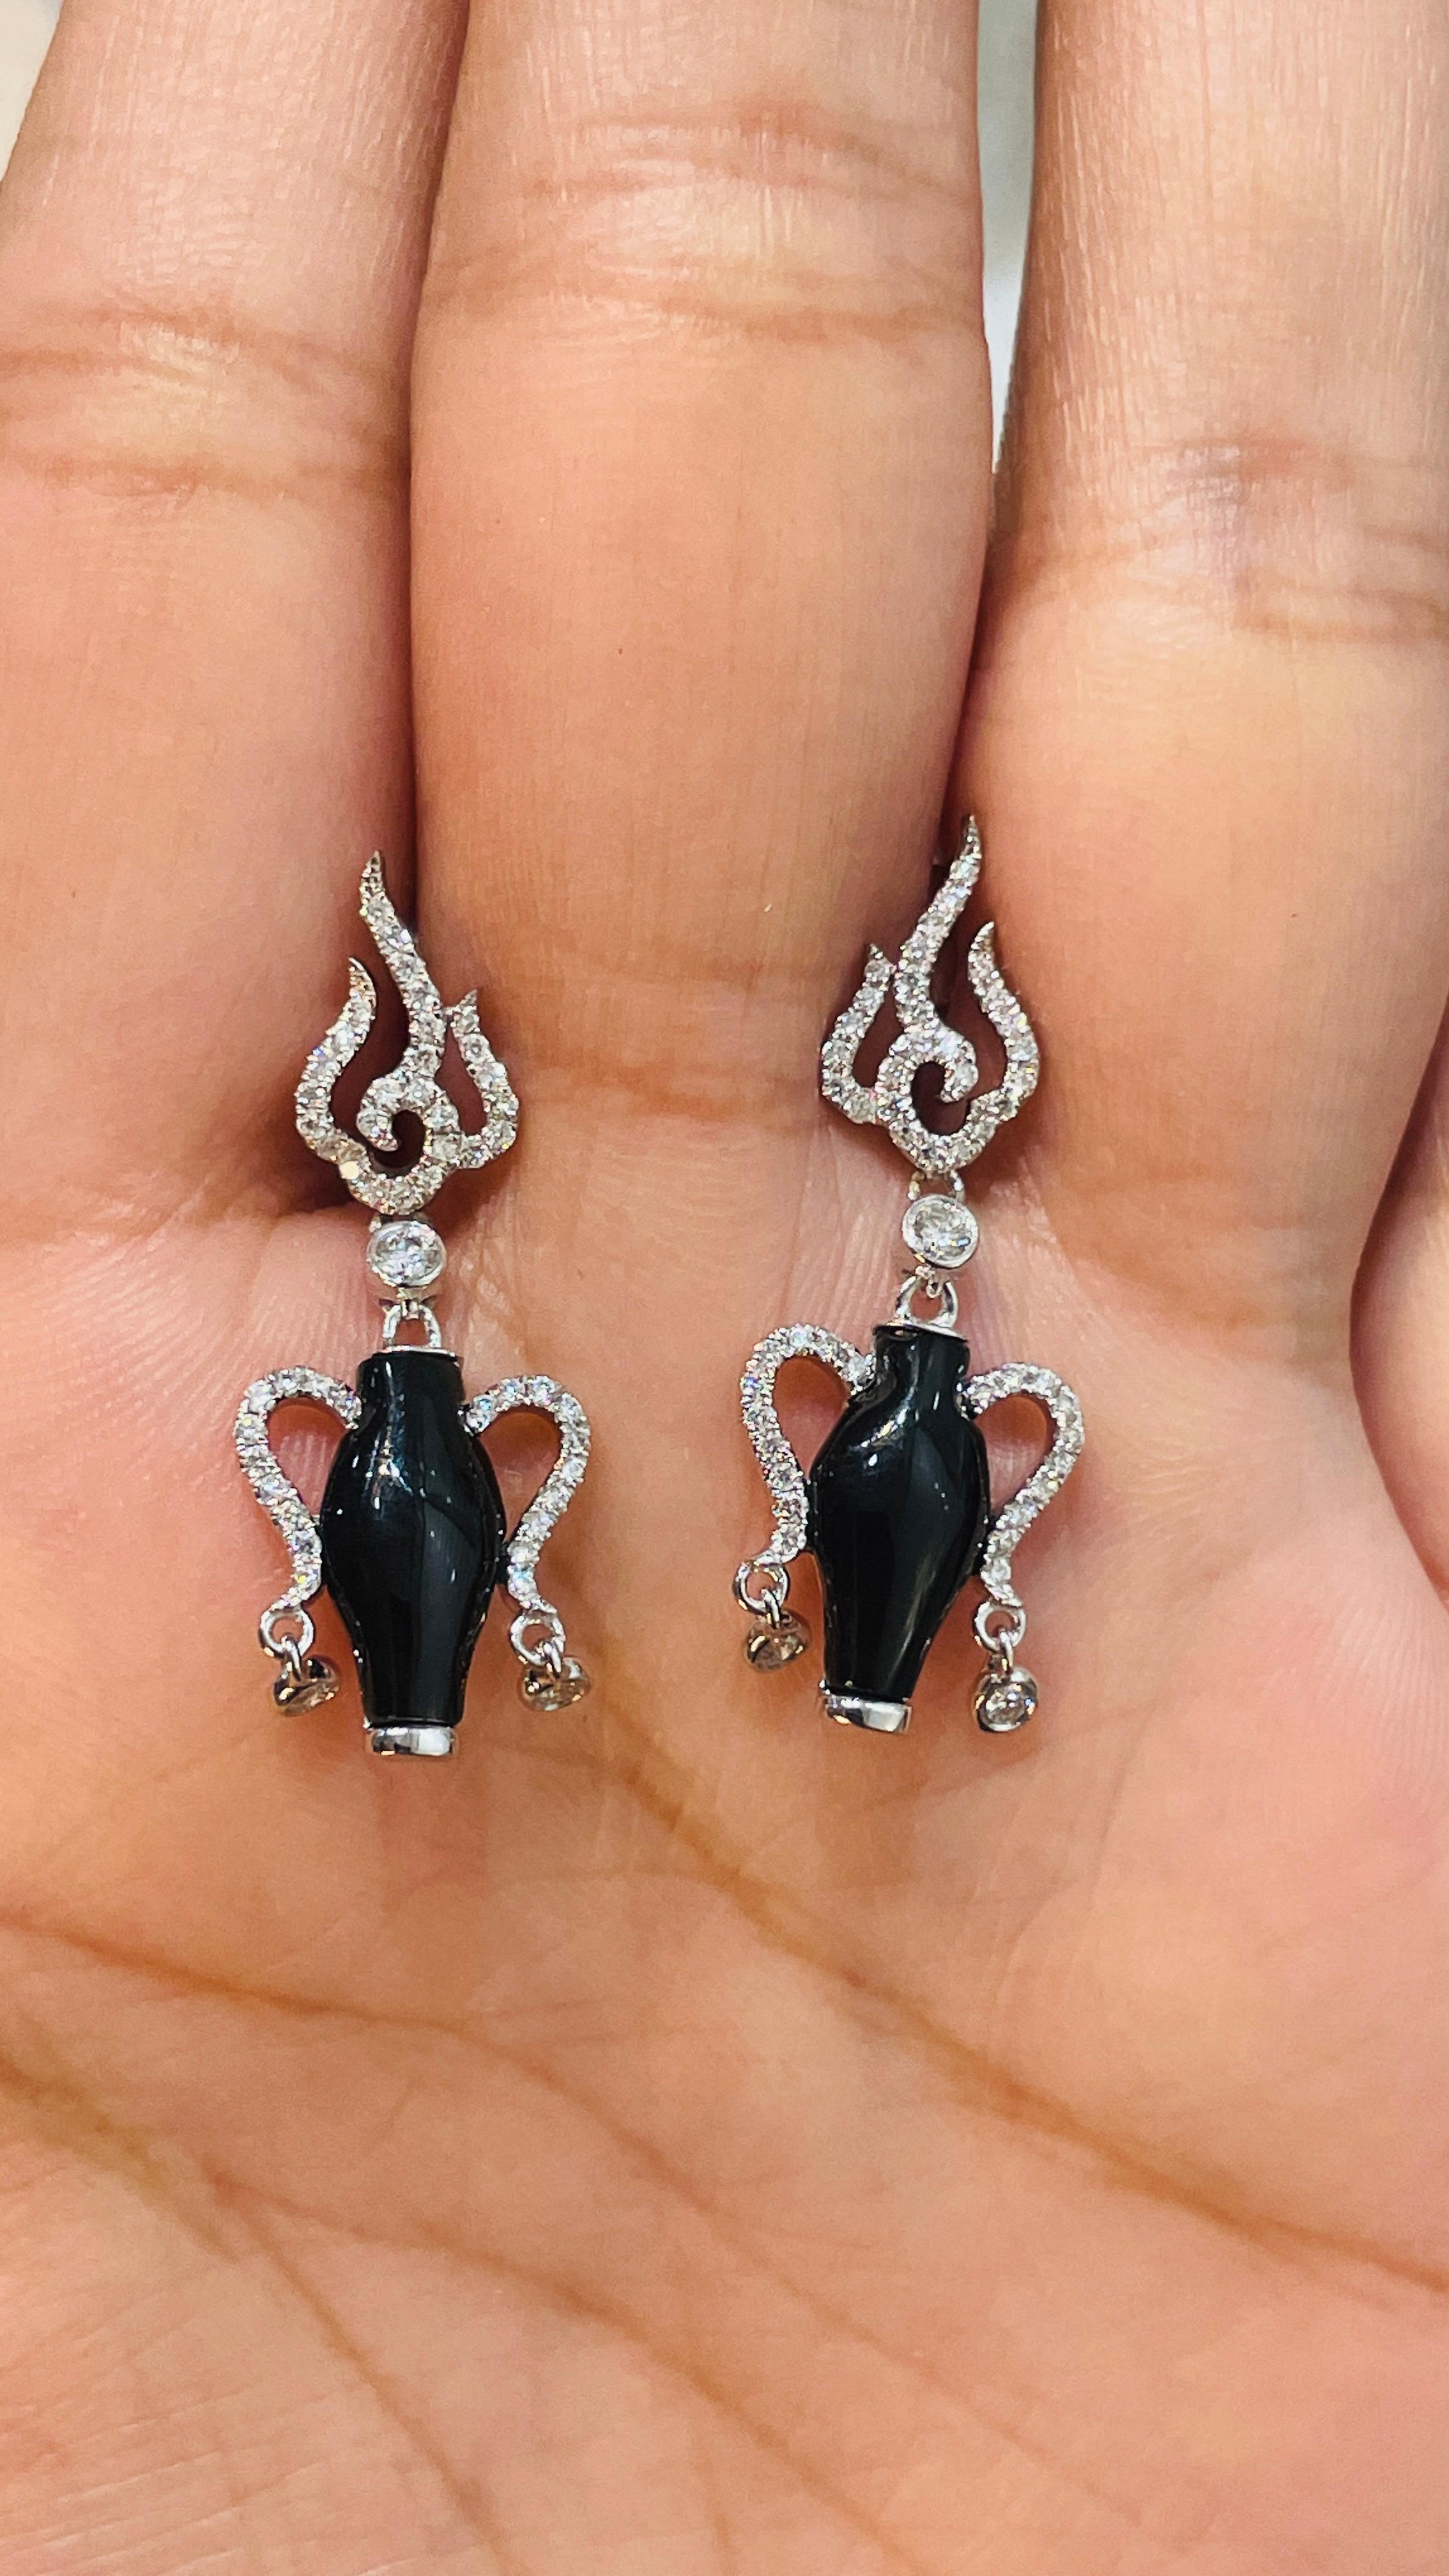 Diamond Dangle earrings to make a statement with your look. These earrings create a sparkling, luxurious look featuring round cut gemstone.
If you love to gravitate towards unique styles, this piece of jewelry is perfect for you.

PRODUCT DETAILS